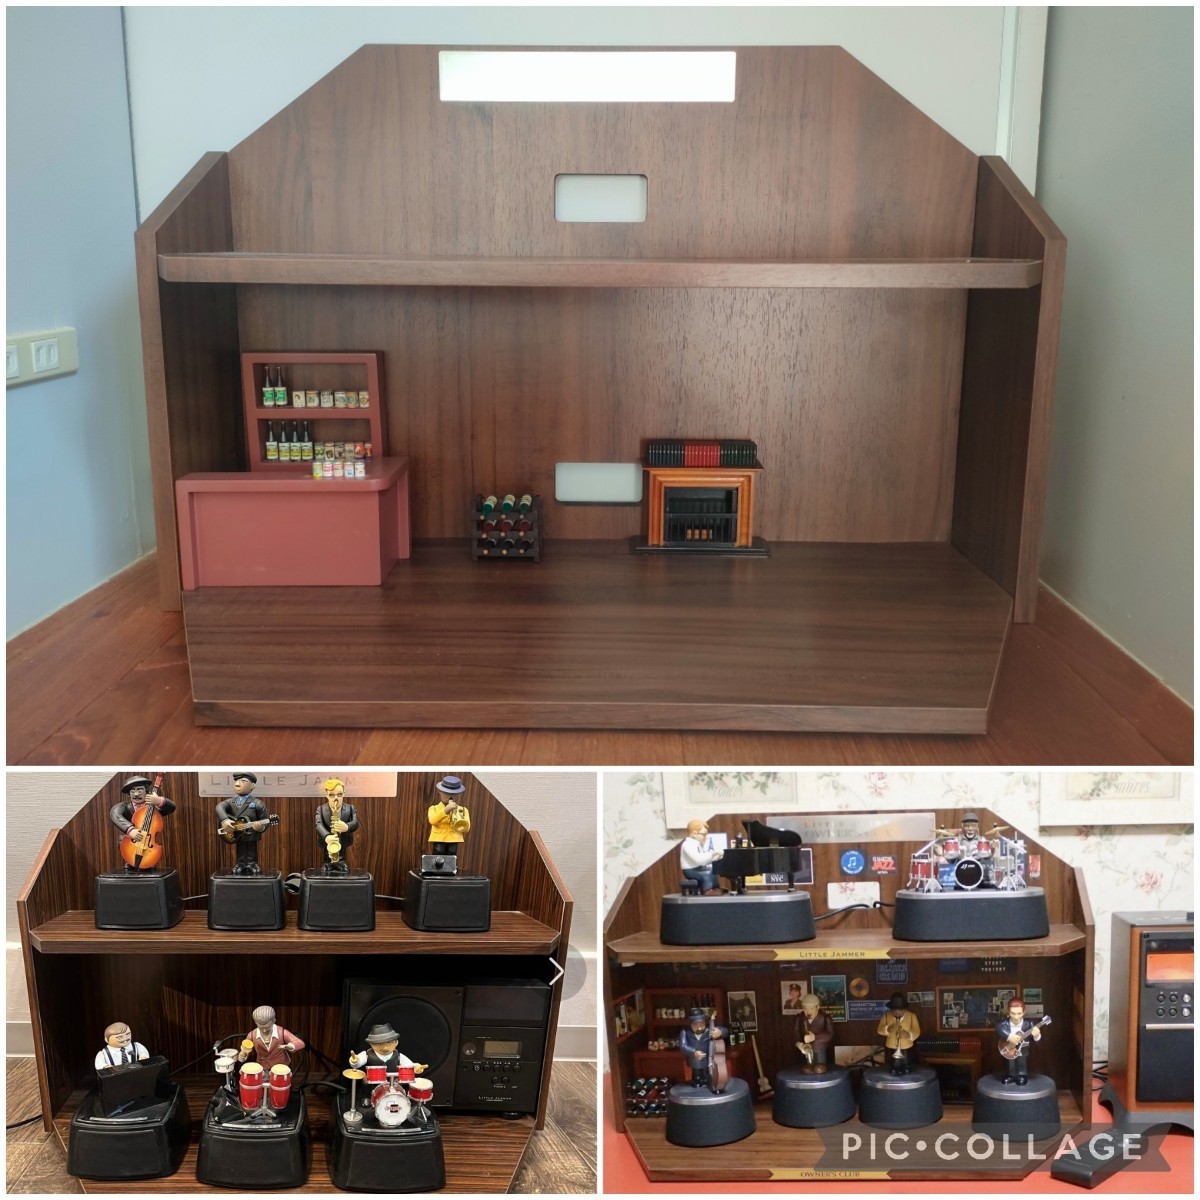  prompt decision BANDAI Bandai LITTLE JAMMER meets little jama- Pro series Pro display Lux te-ji fireplace furniture attaching small articles attaching 